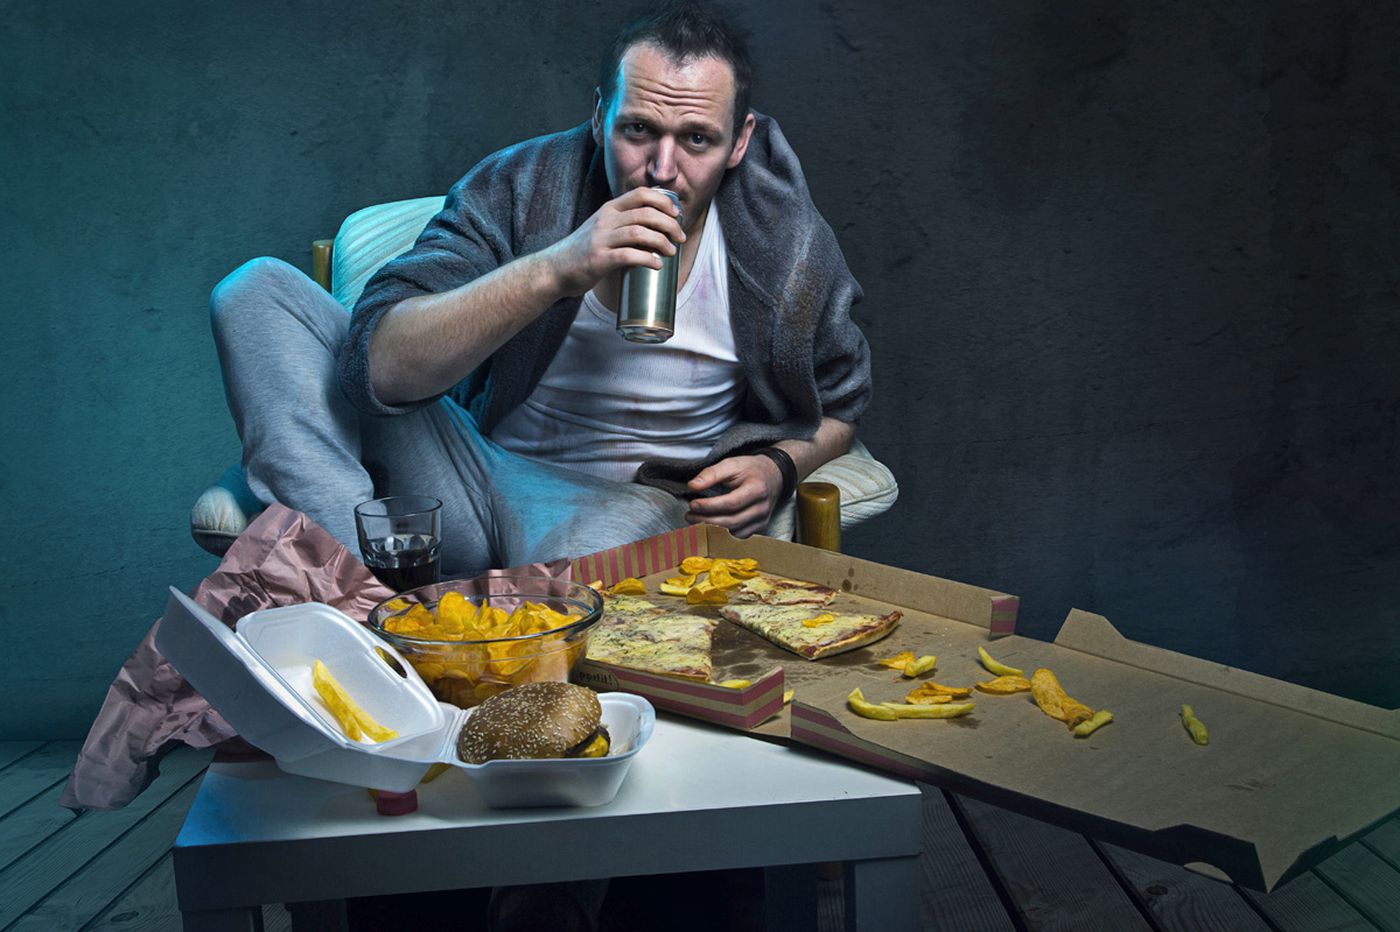 Reasons why people crave more high-fat foods after a sleepless night: Finds Study